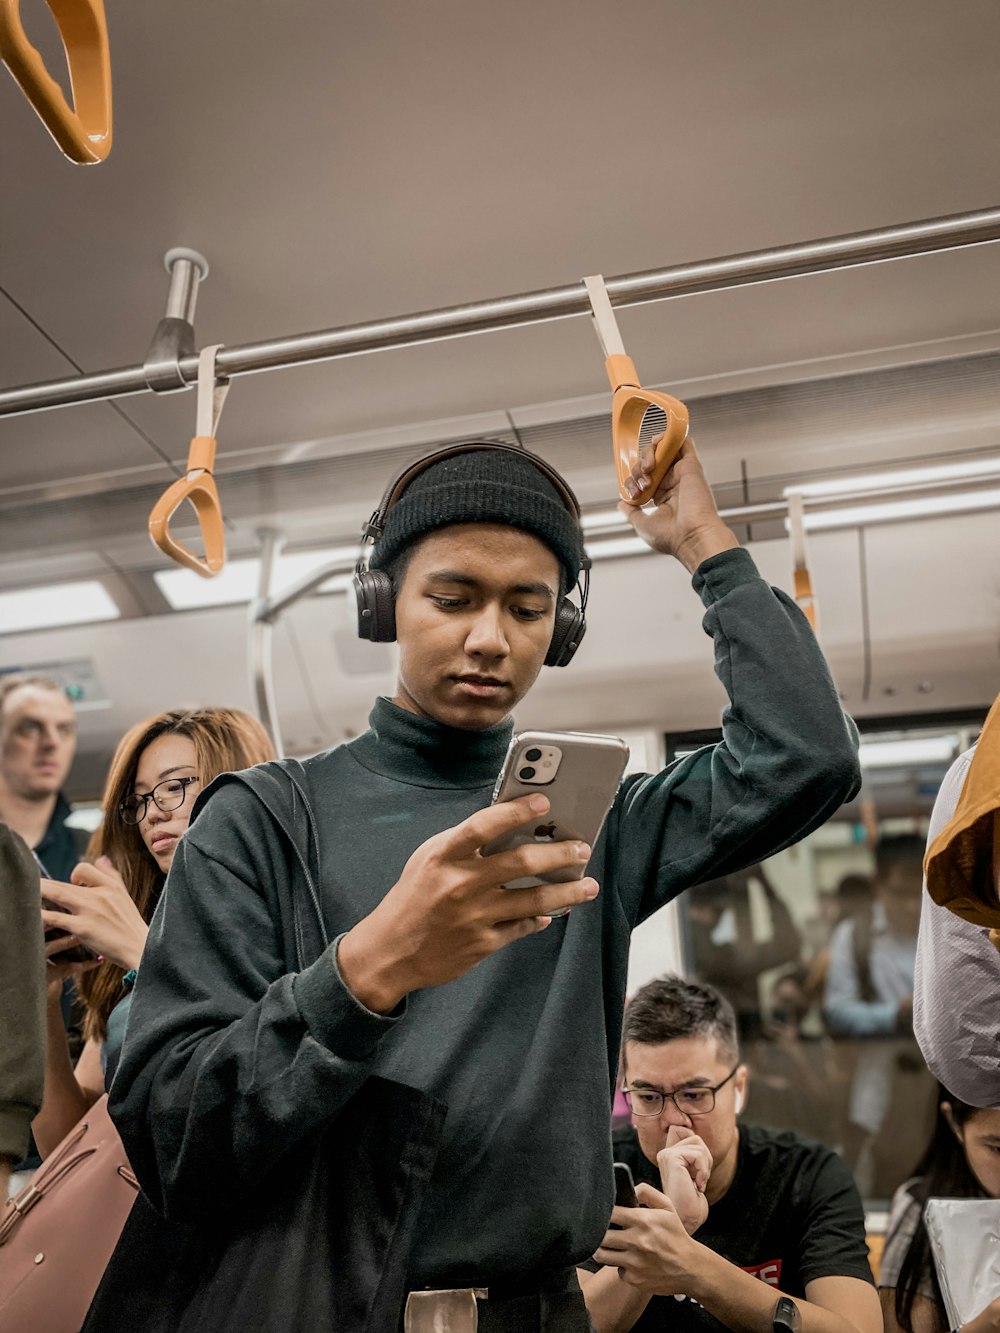 man in train holding smartphone